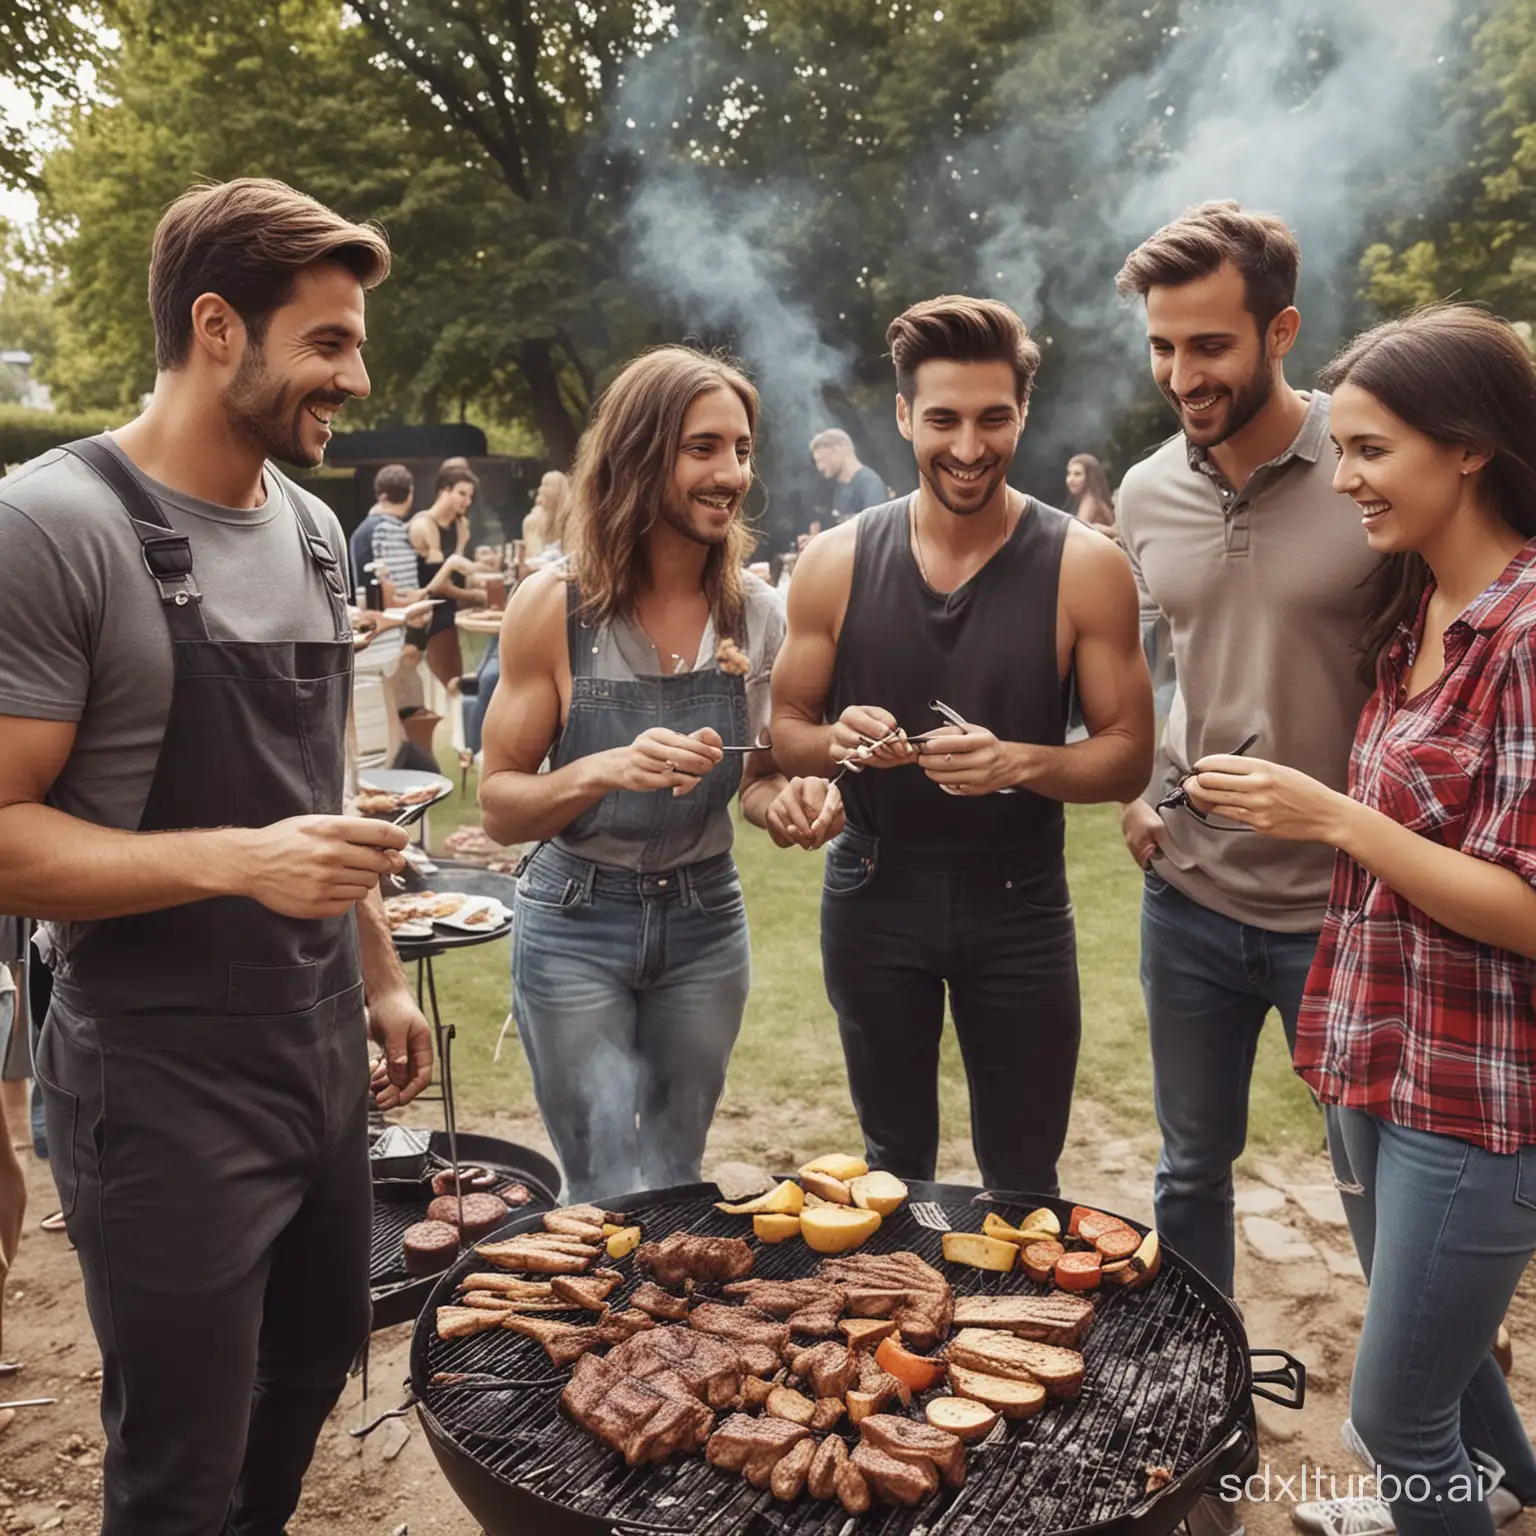 Friends-Enjoying-a-Charcoal-Barbecue-Outing